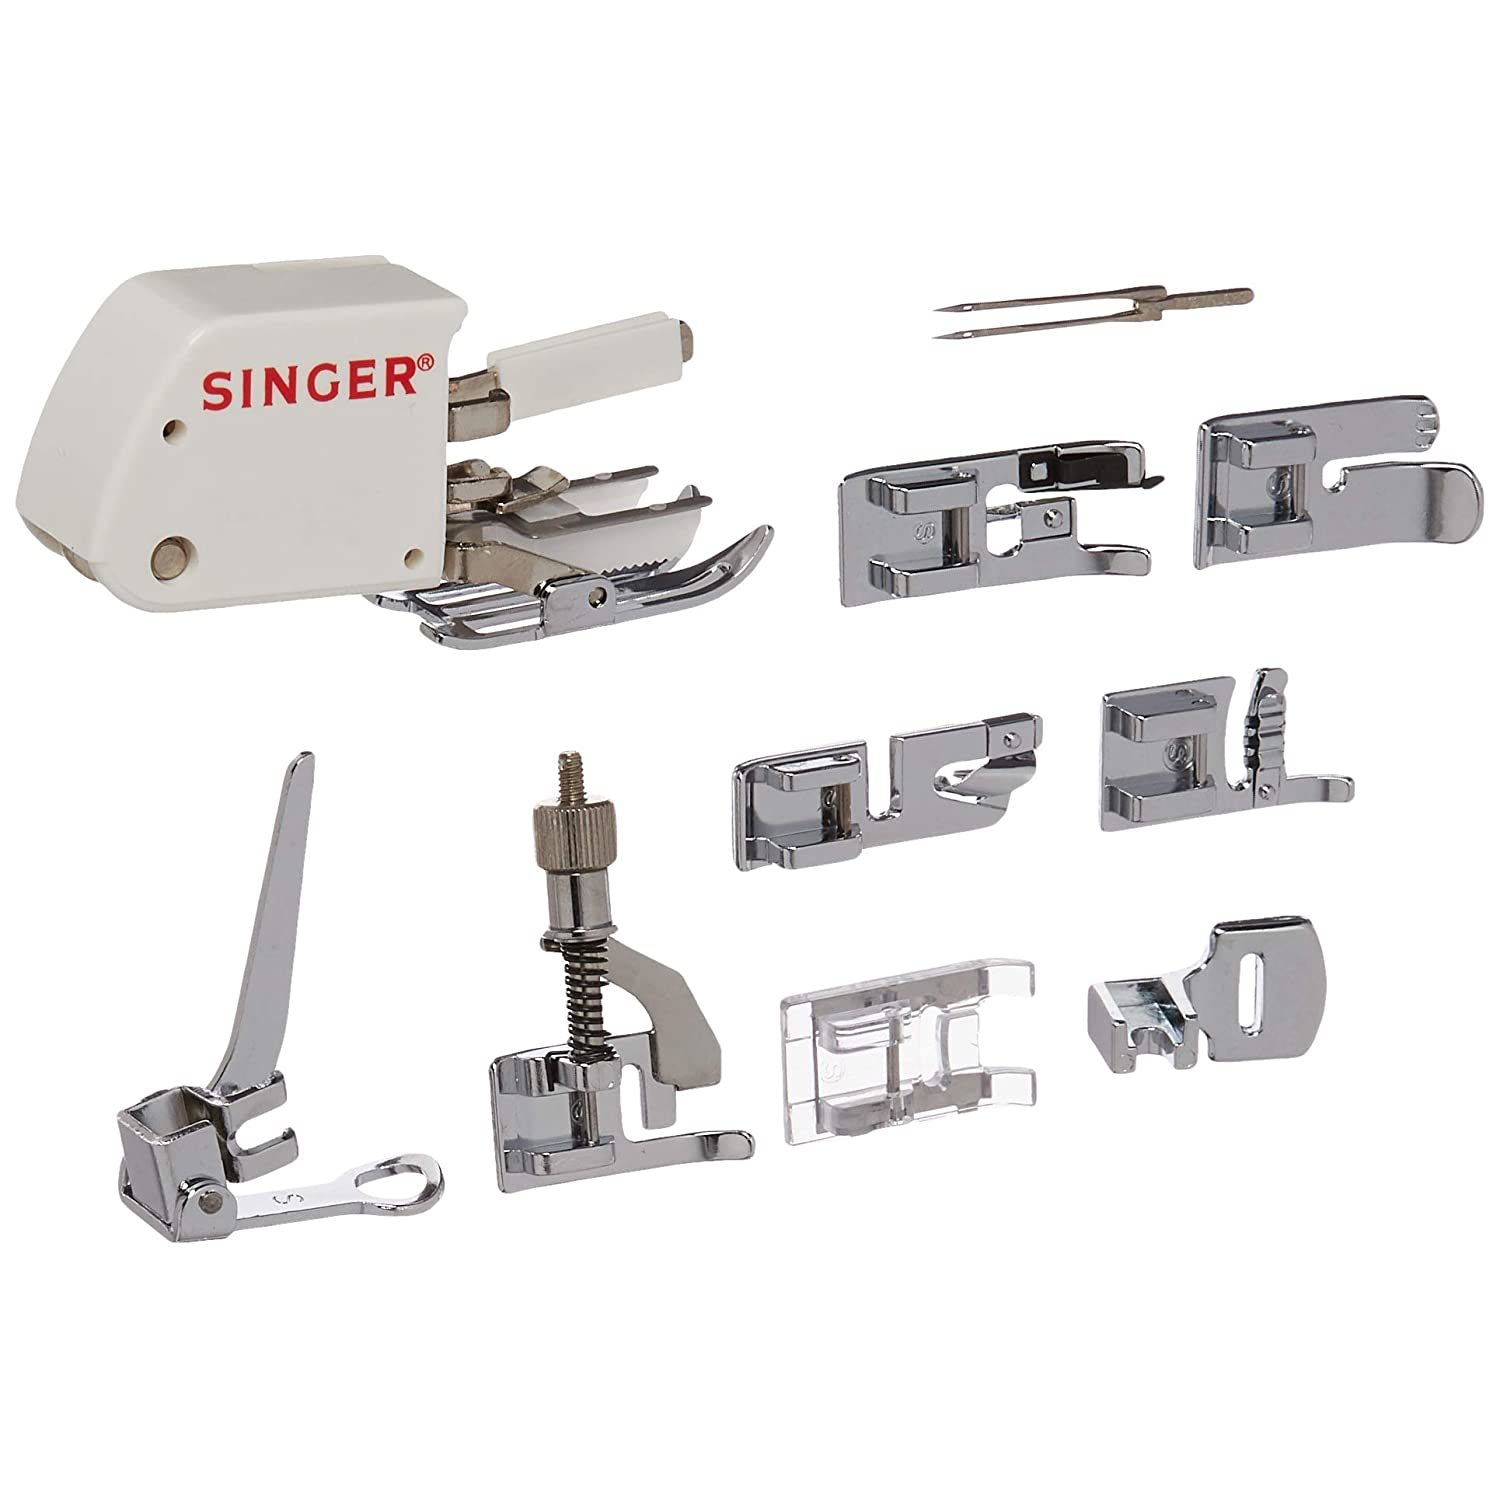 Primary image for SINGER | Sewing Machine Accessory Kit, Including 9 Presser Feet, Twin Needle, an